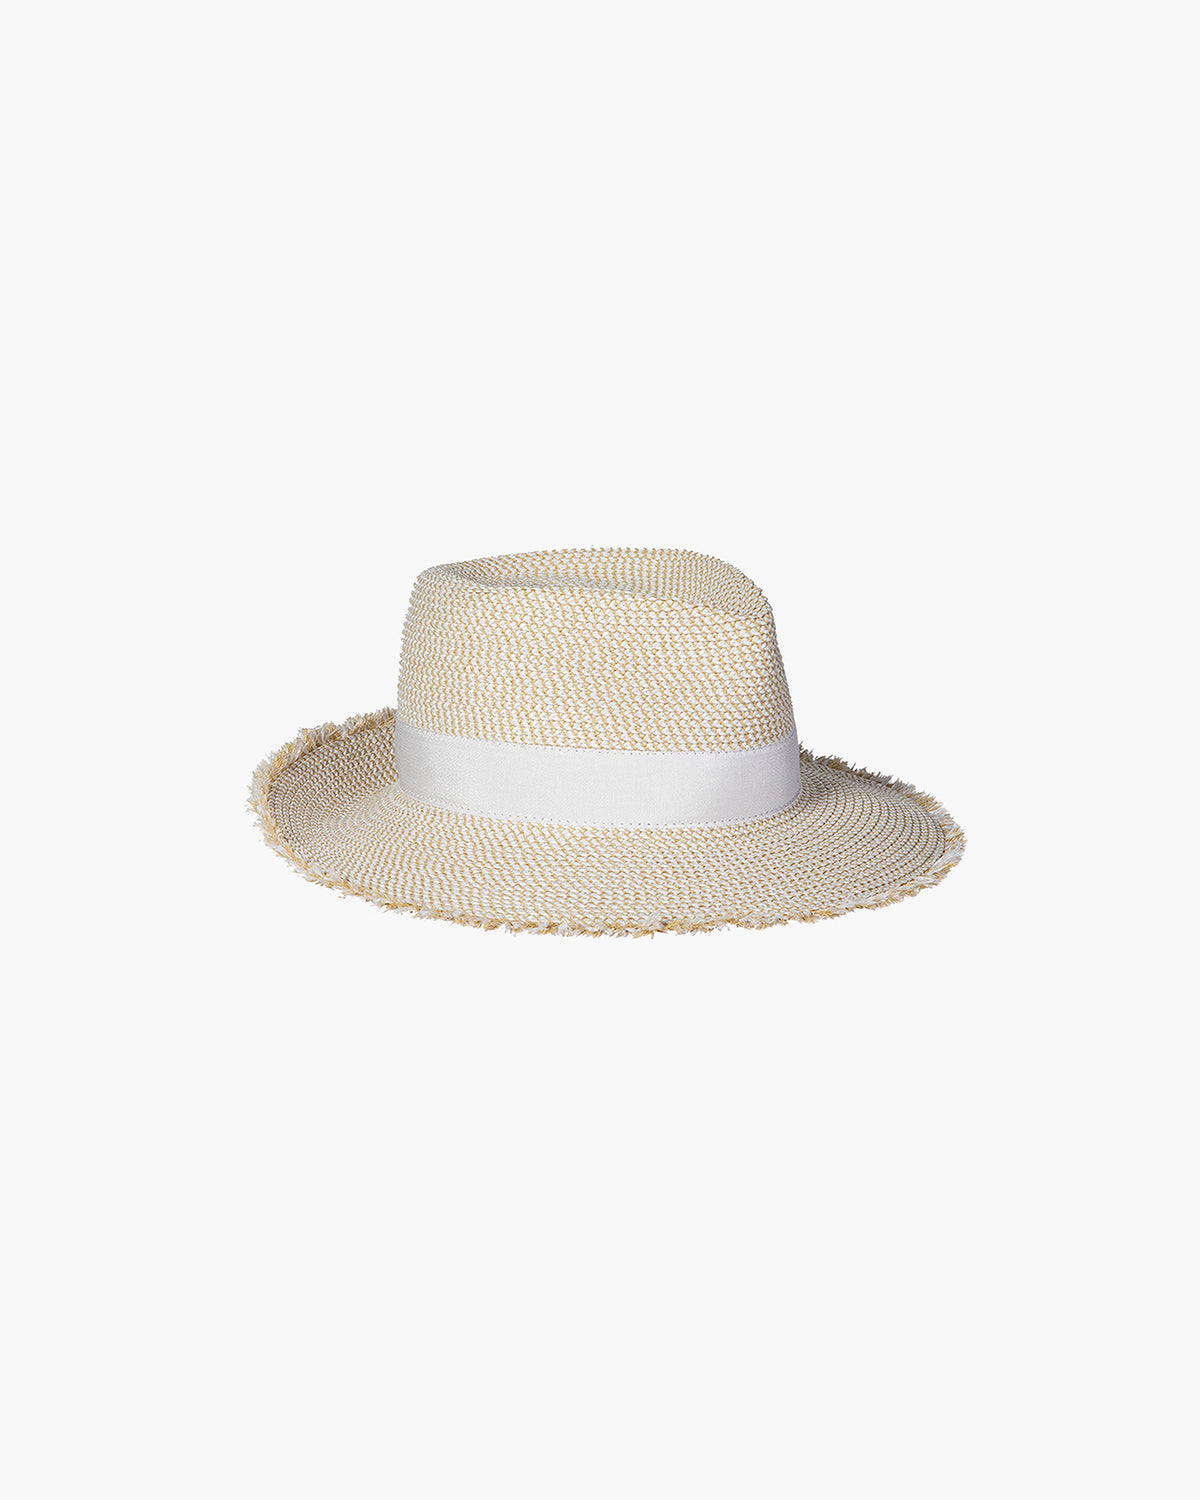 Stylish Men's Hats for Every Occasion